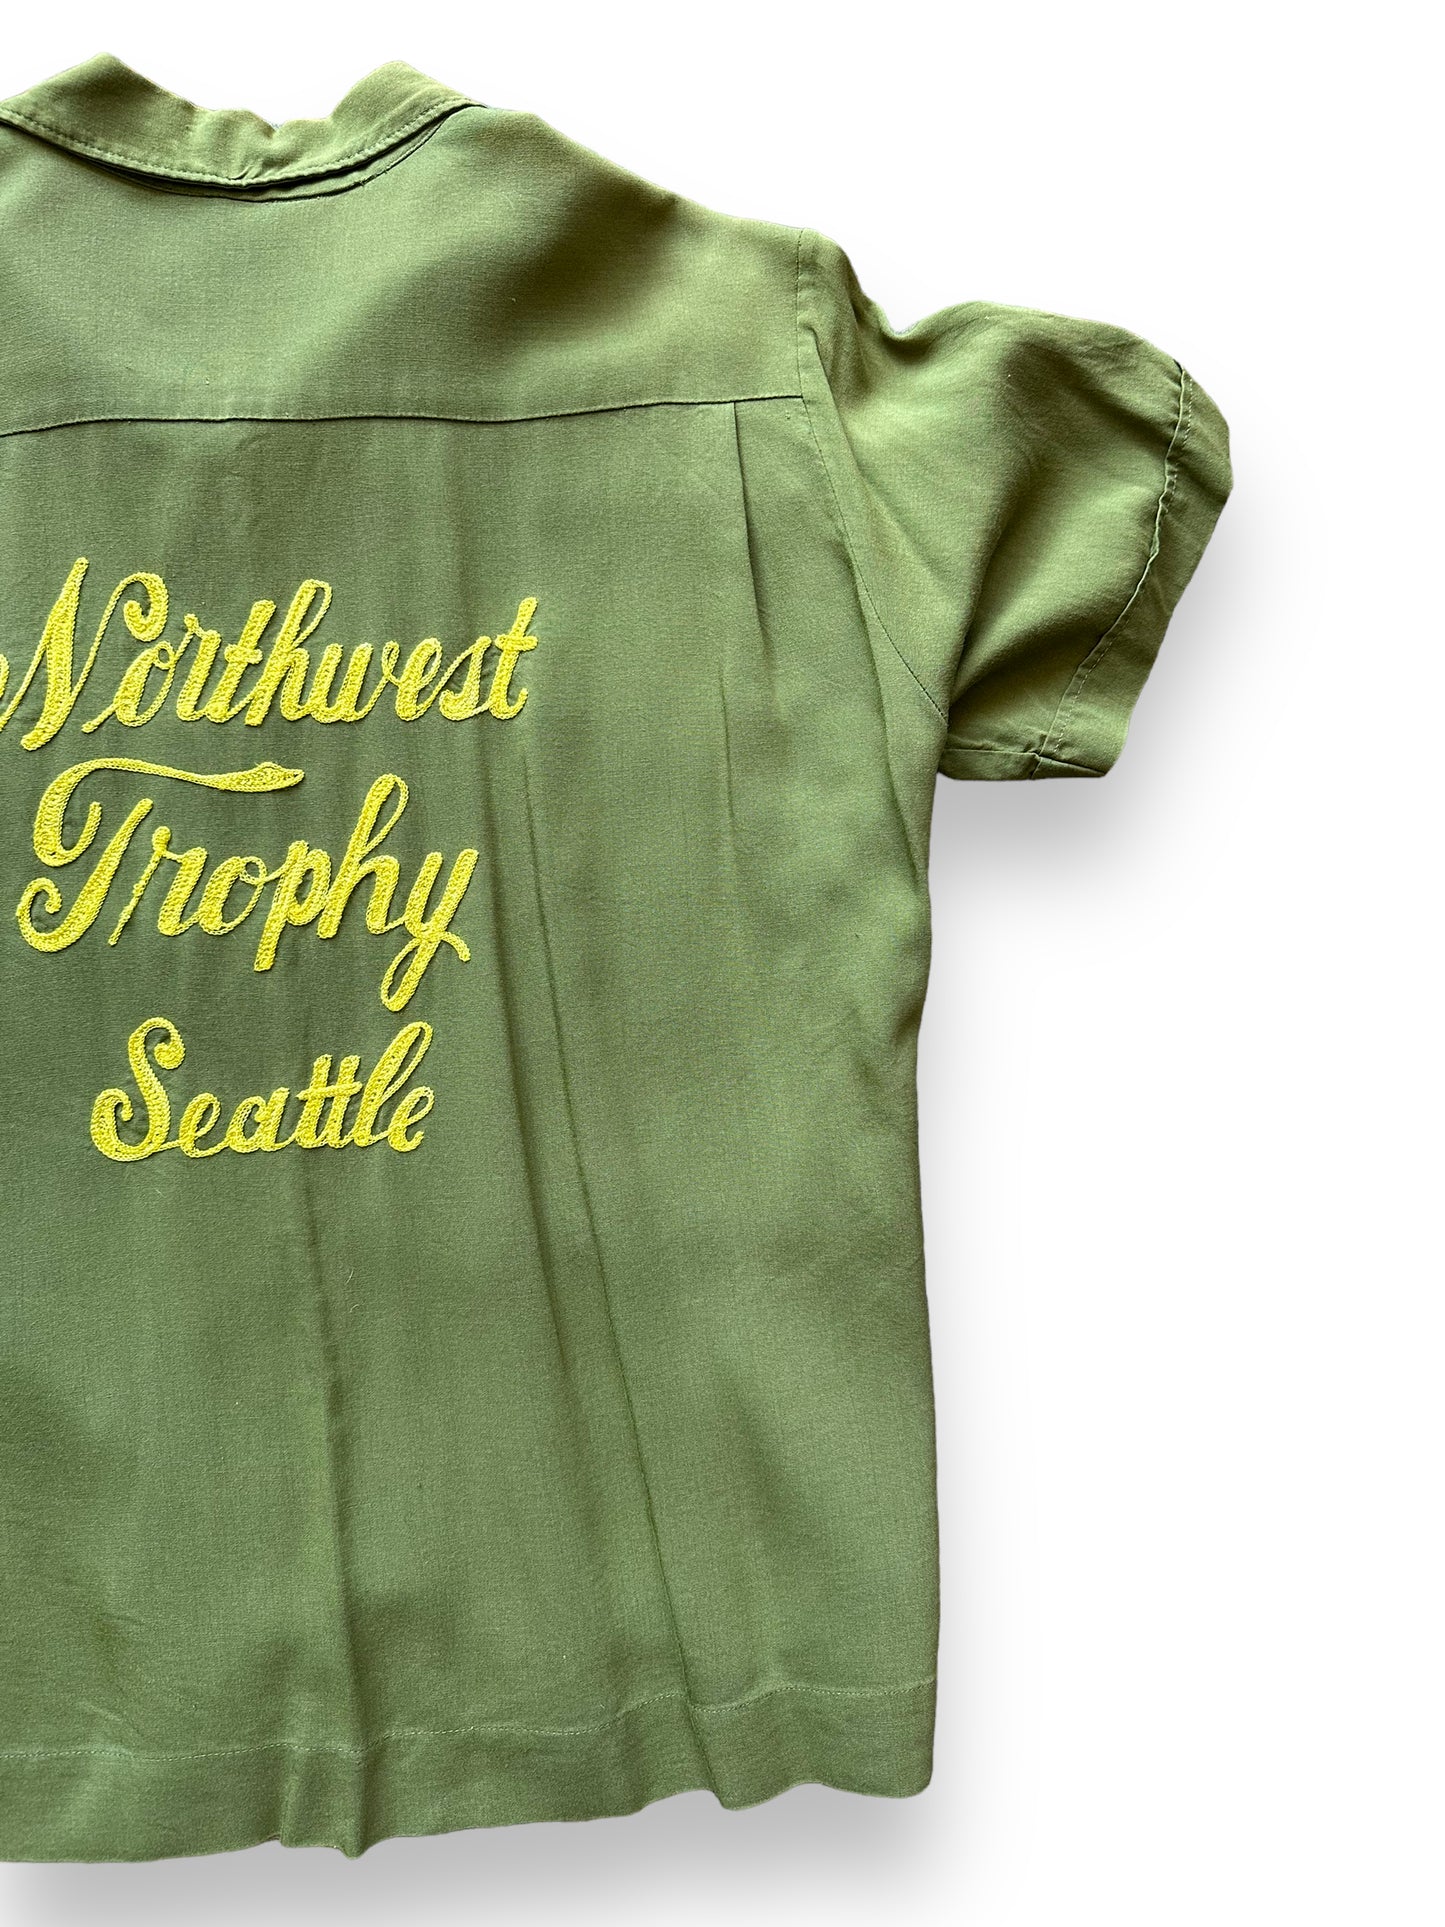 Rear Right View of Vintage Northwest Trophy Seattle Bowling Shirt SZ M | Vintage Bowling Shirt Seattle | Barn Owl Vintage Seattle